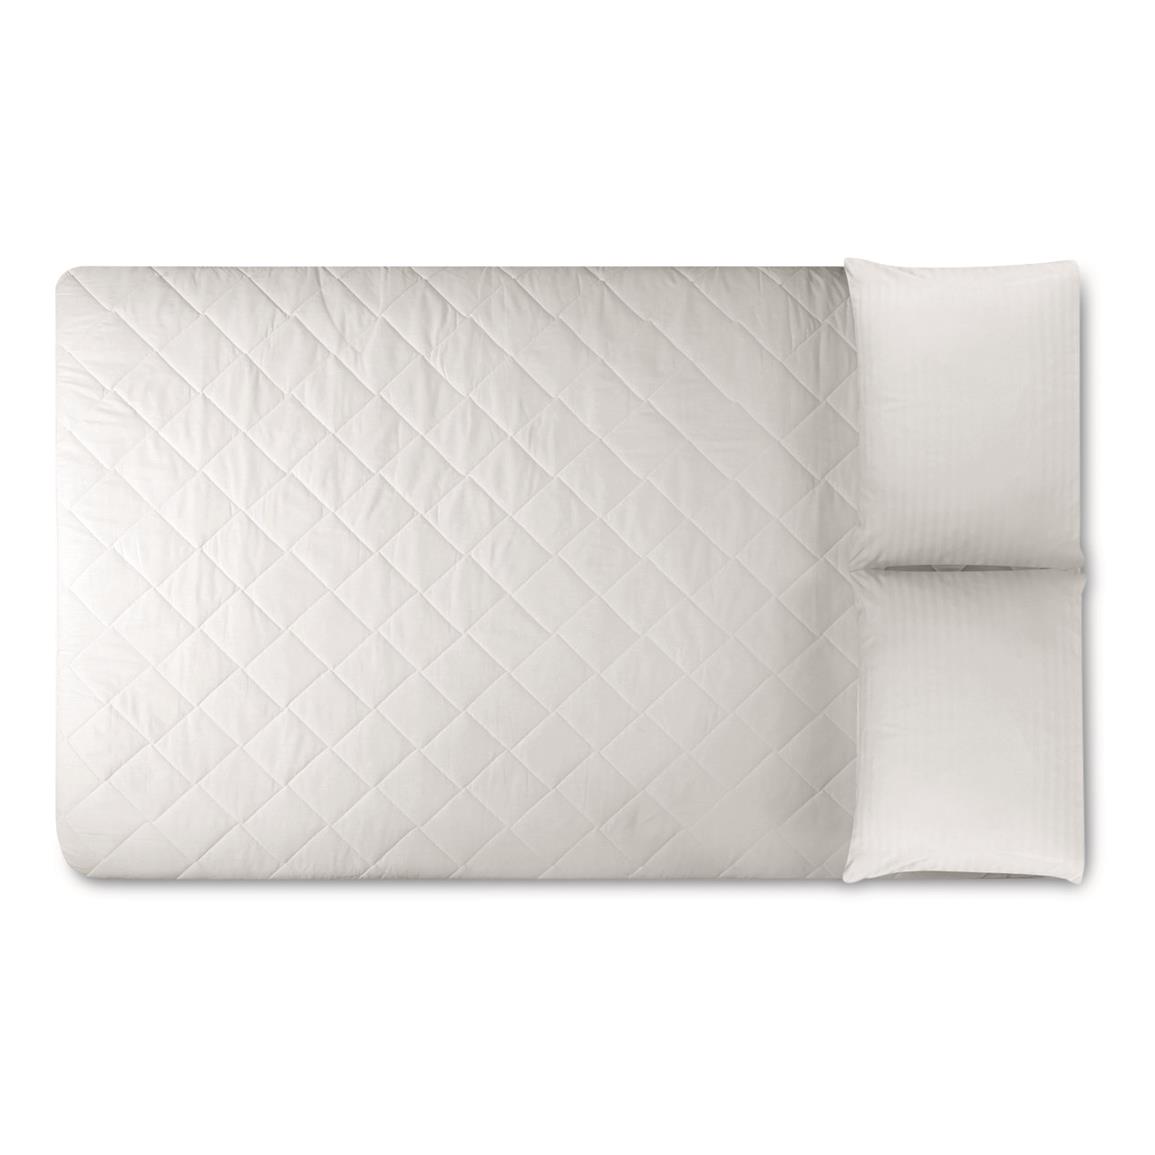 Shavel Home Products Microfiber RV Mattress Pad, White